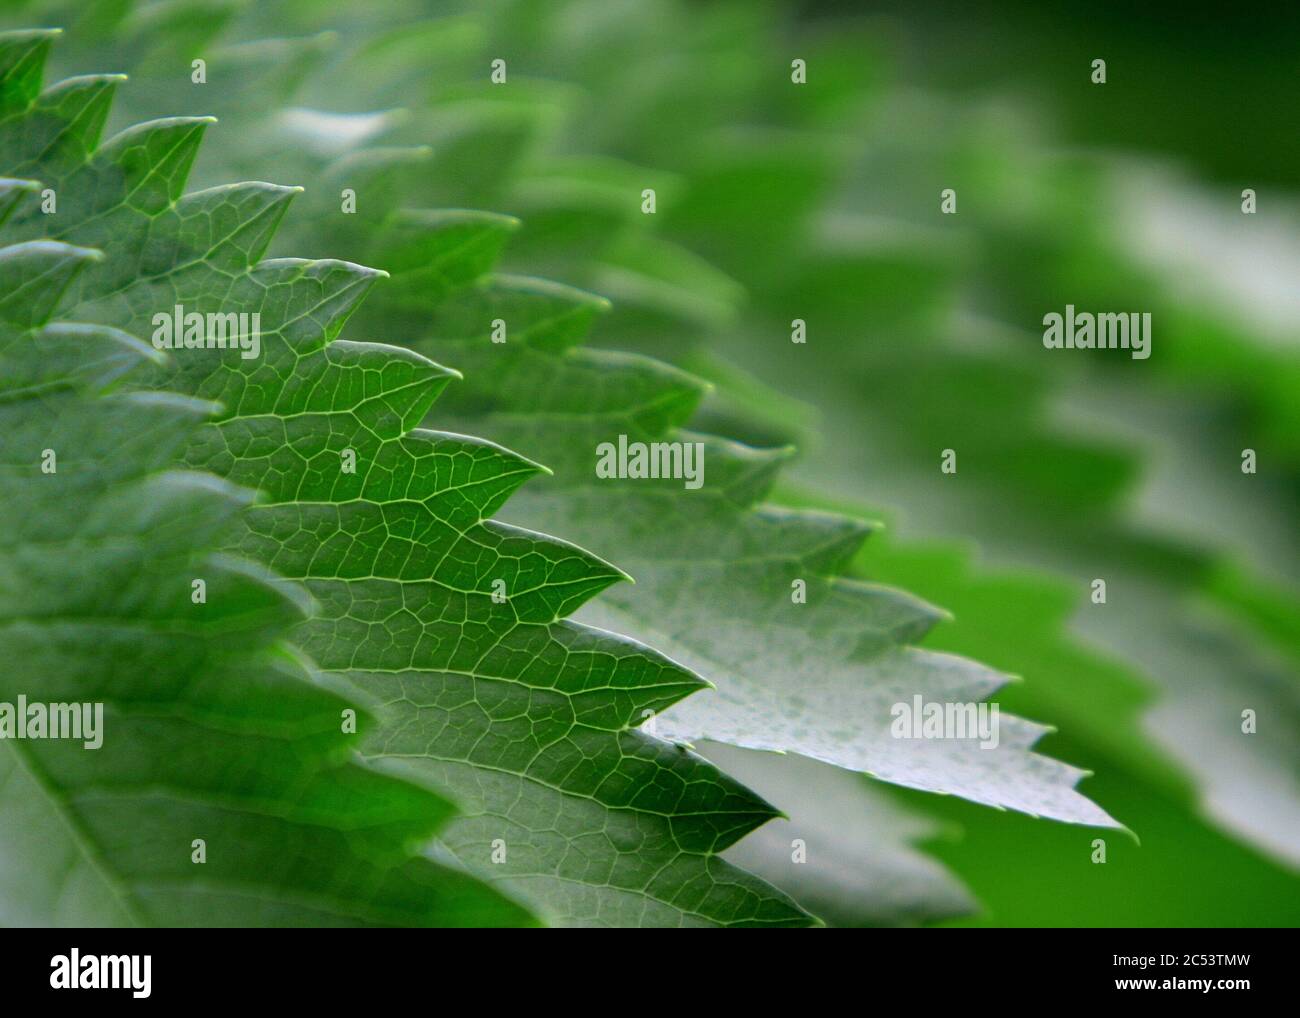 Close-up photo featuring the jagged edges of a plant's leaves. Stock Photo